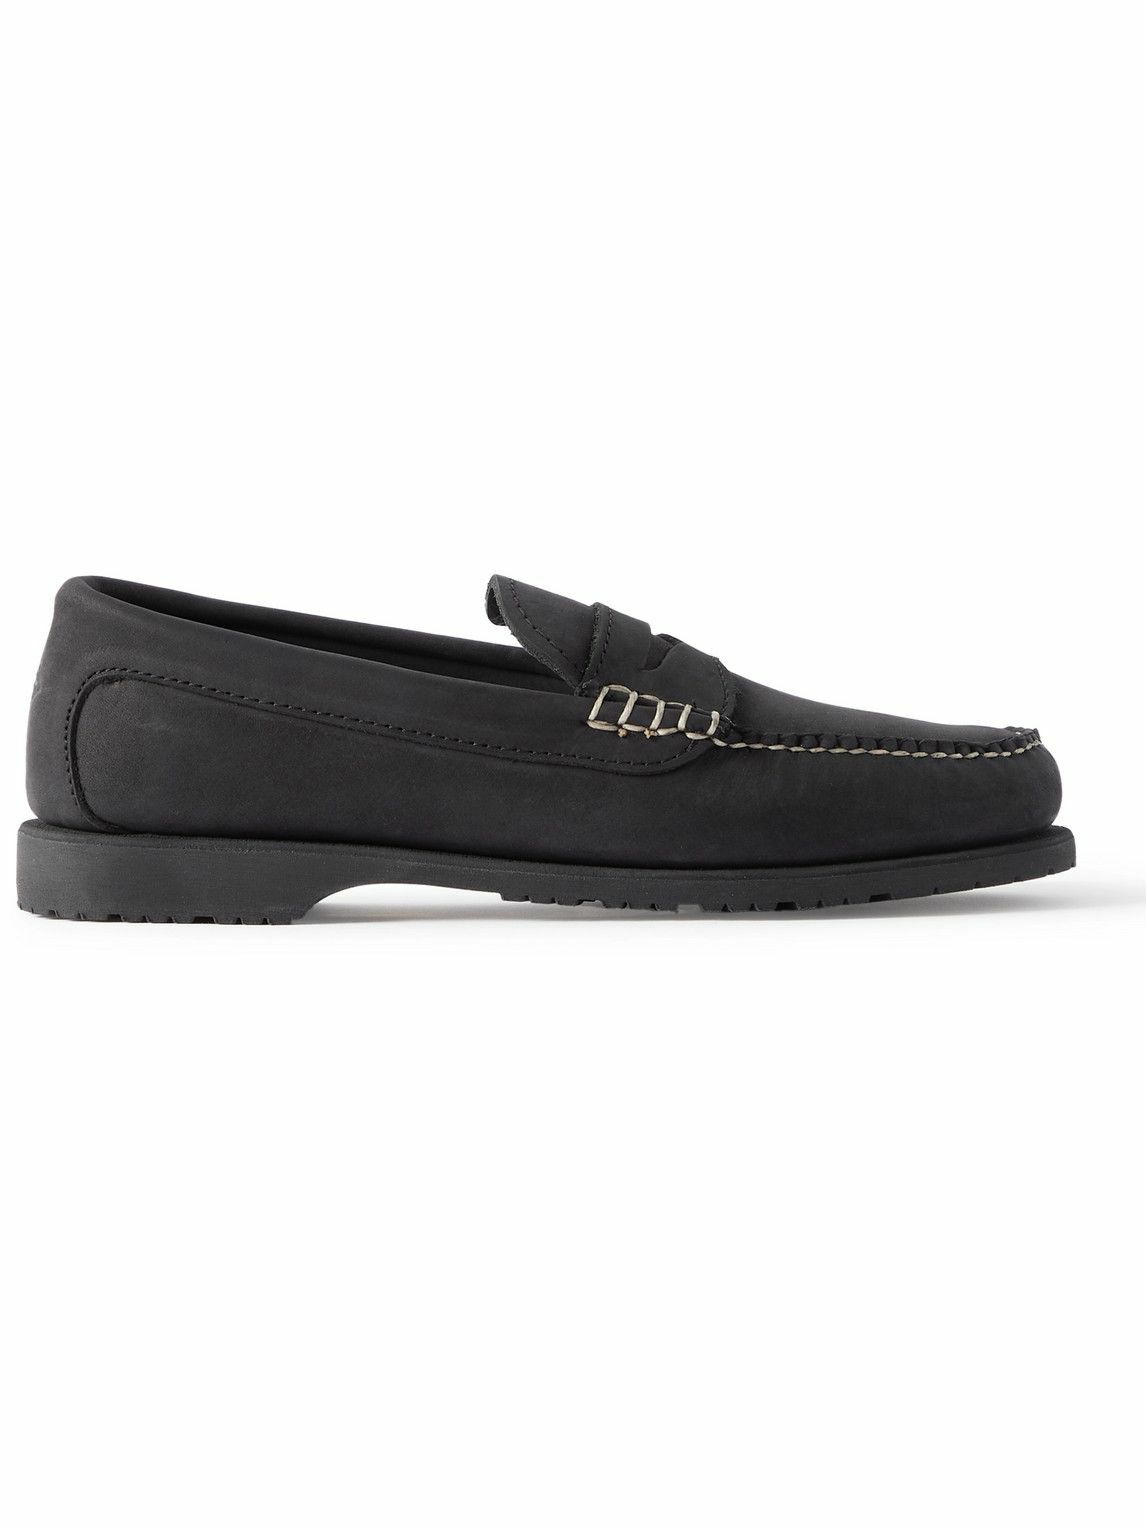 Photo: Quoddy - Rover Capetown Suede Penny Loafers - Black